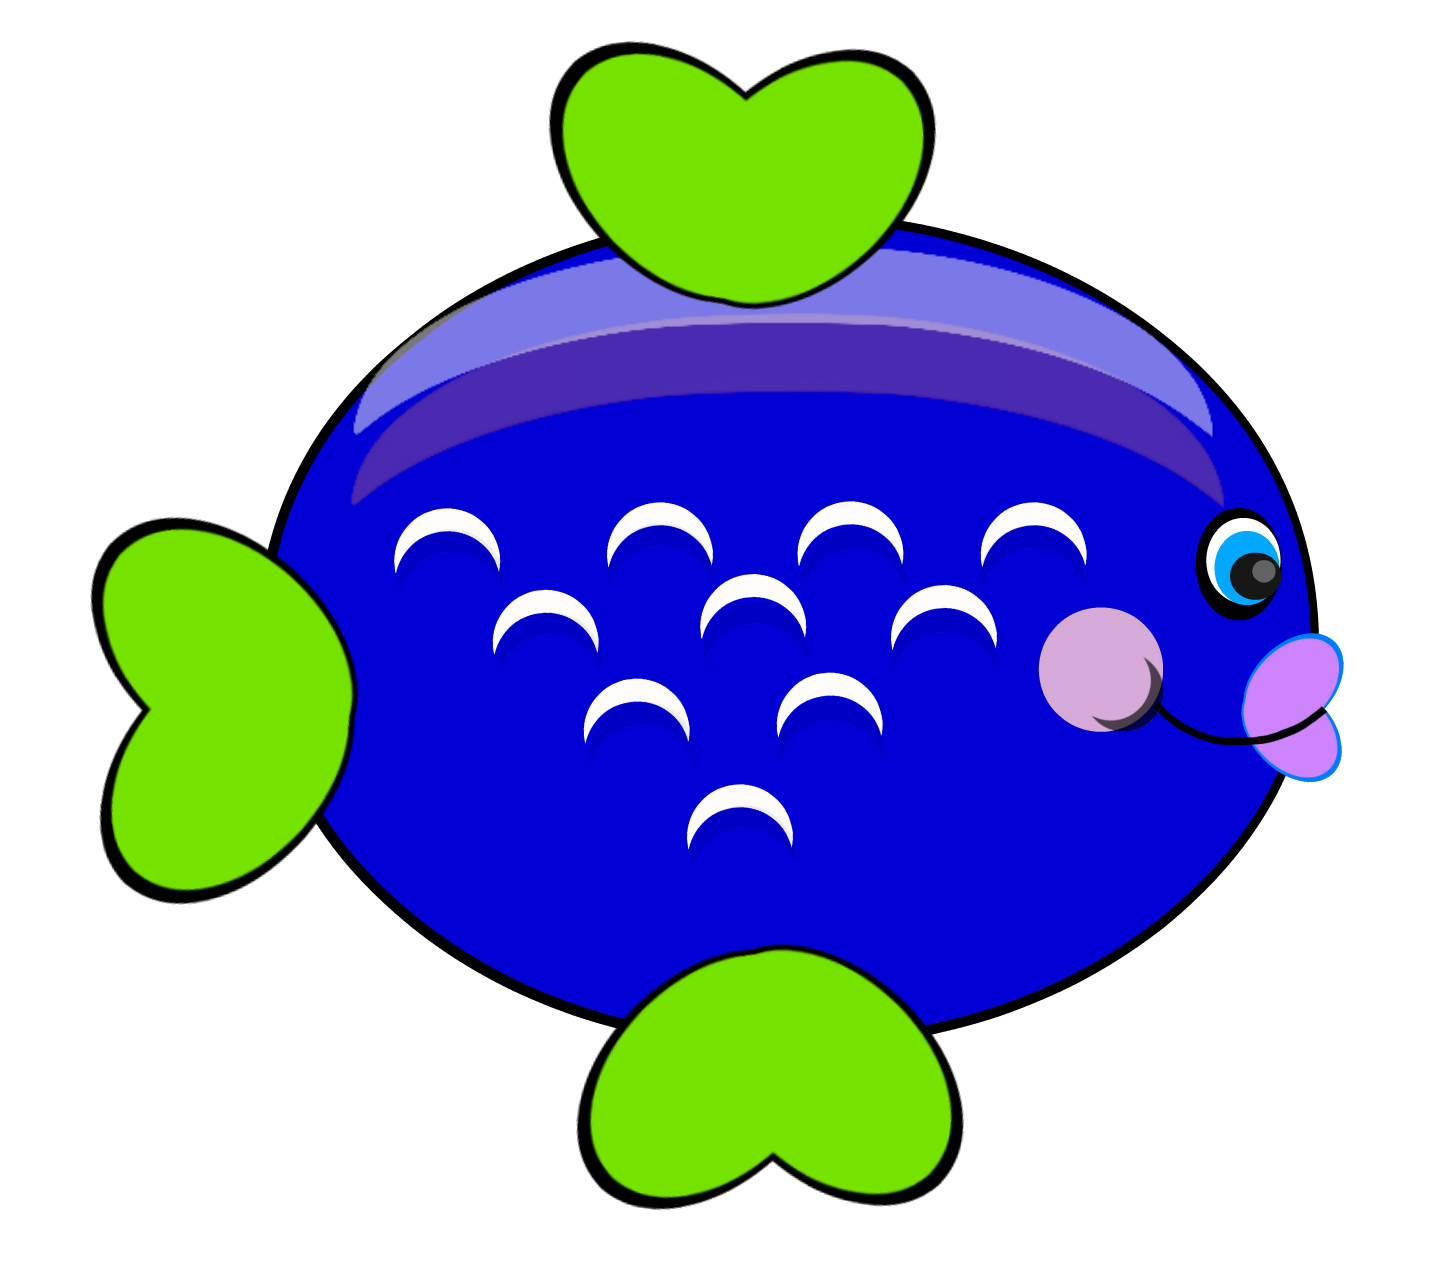 Shiny Blue fish with green fins